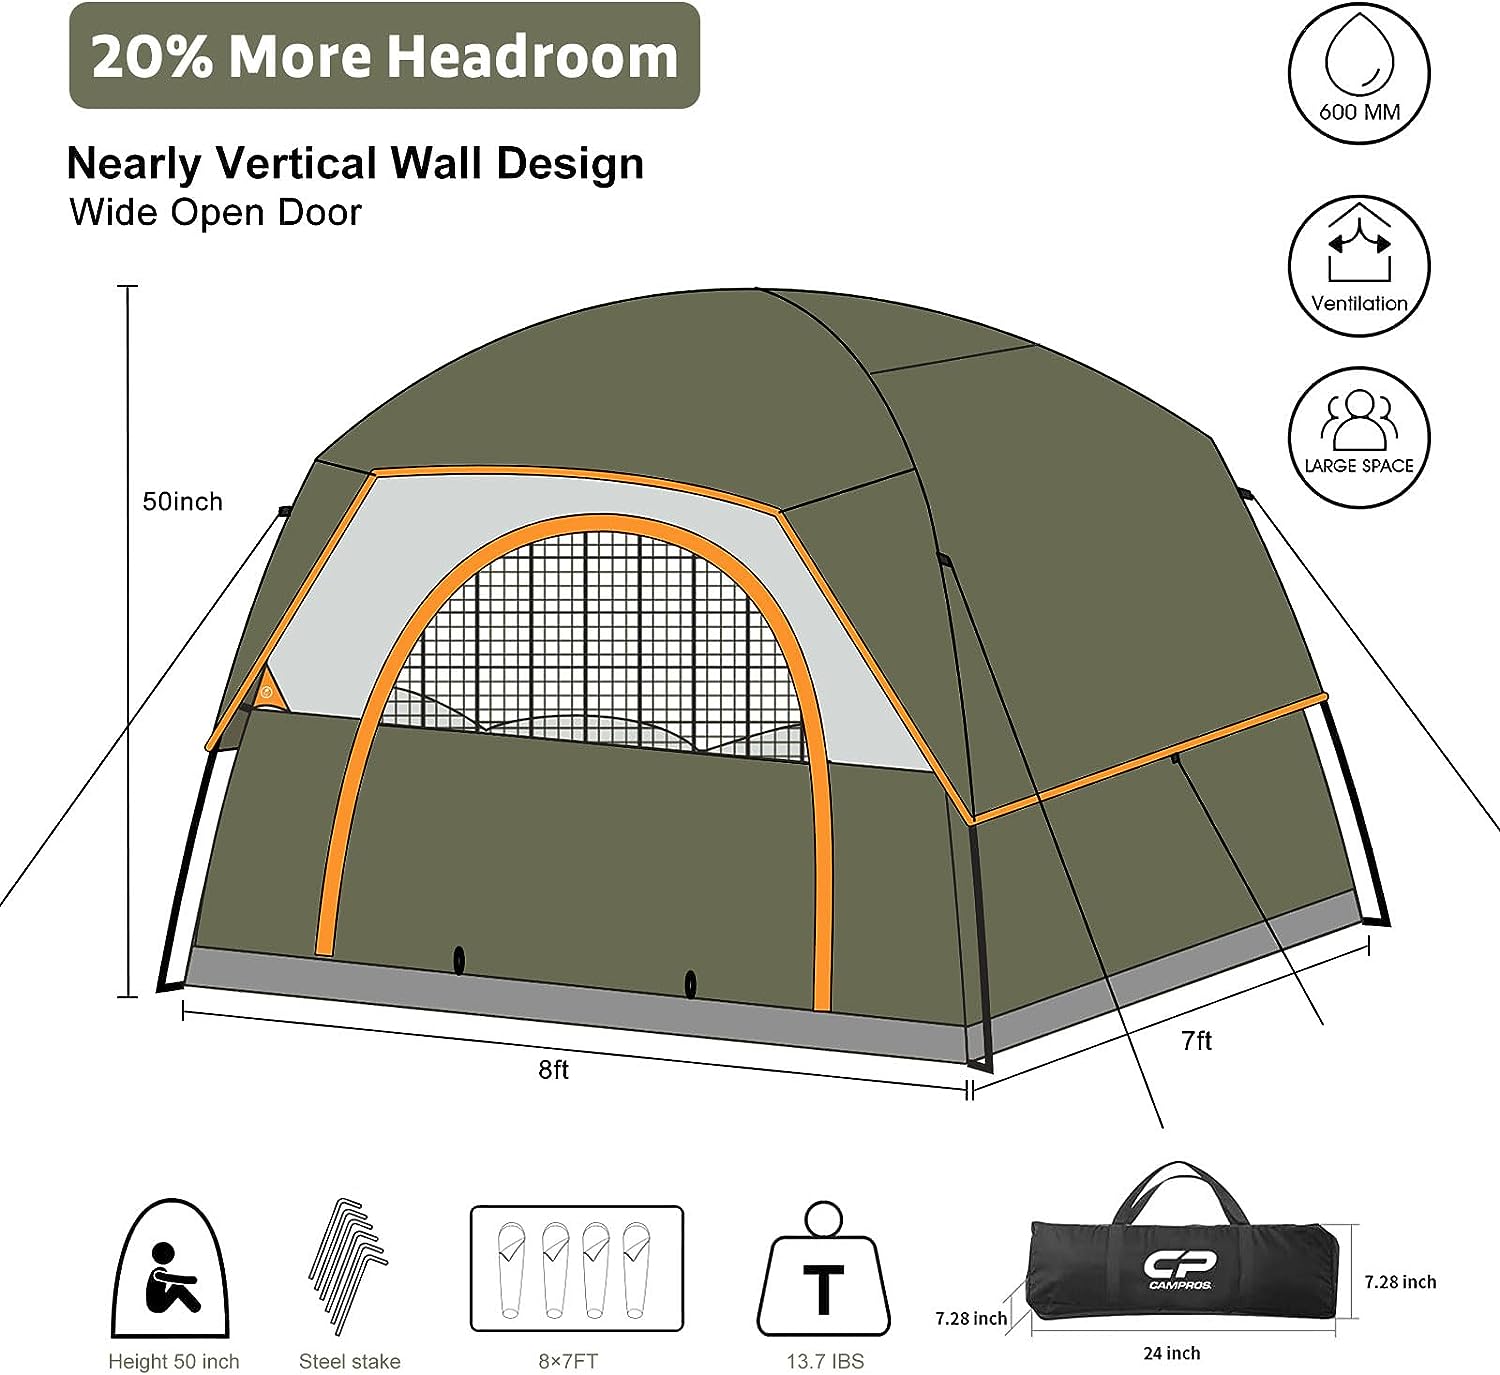 Campros Dome Tent Size